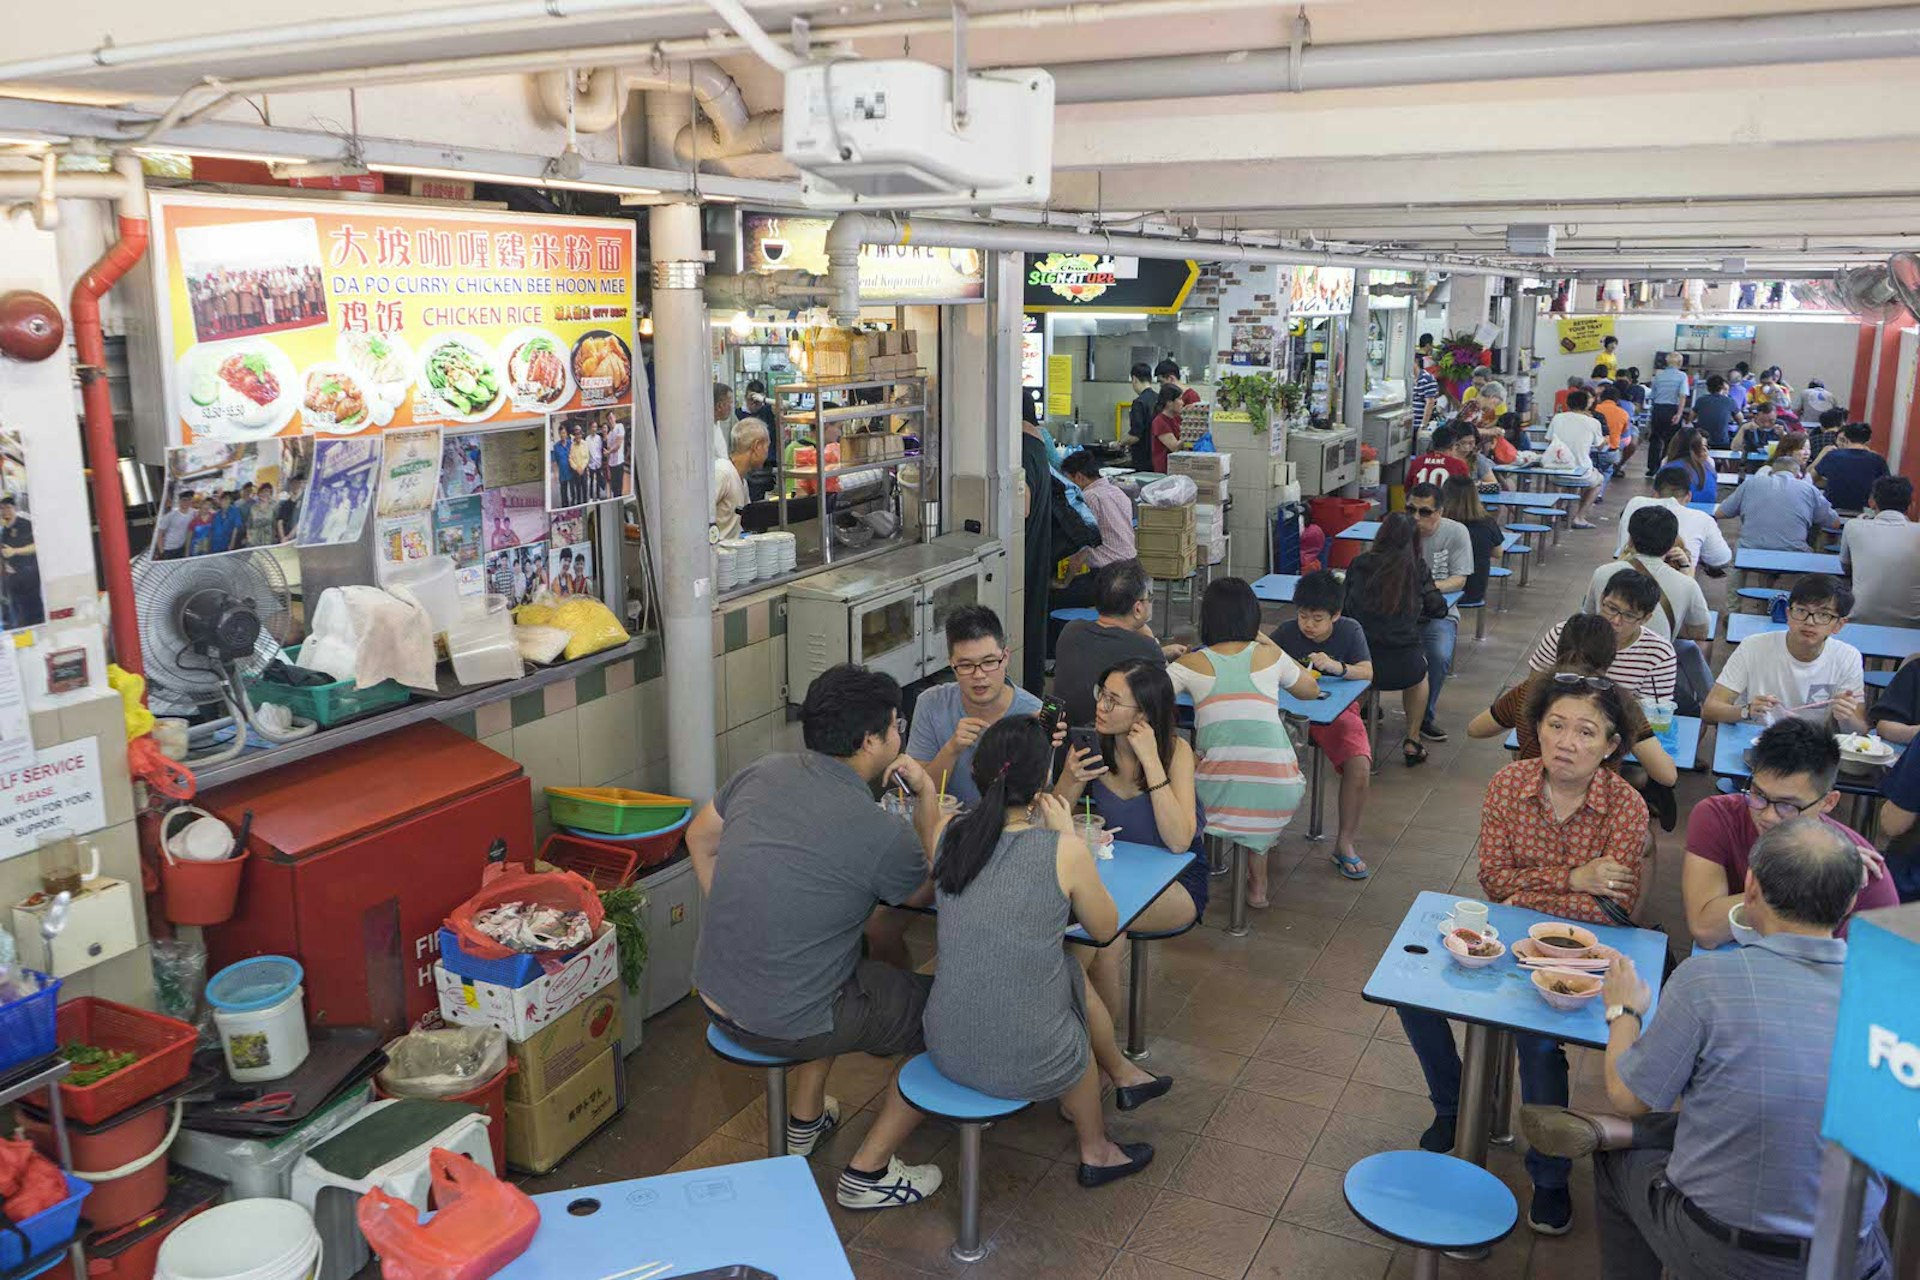 A busy hawker centre in Singapore. There are small blue tables with matching blue stools, almost every table is occupied by groups. Along the left side of the dining area there are various food stalls.